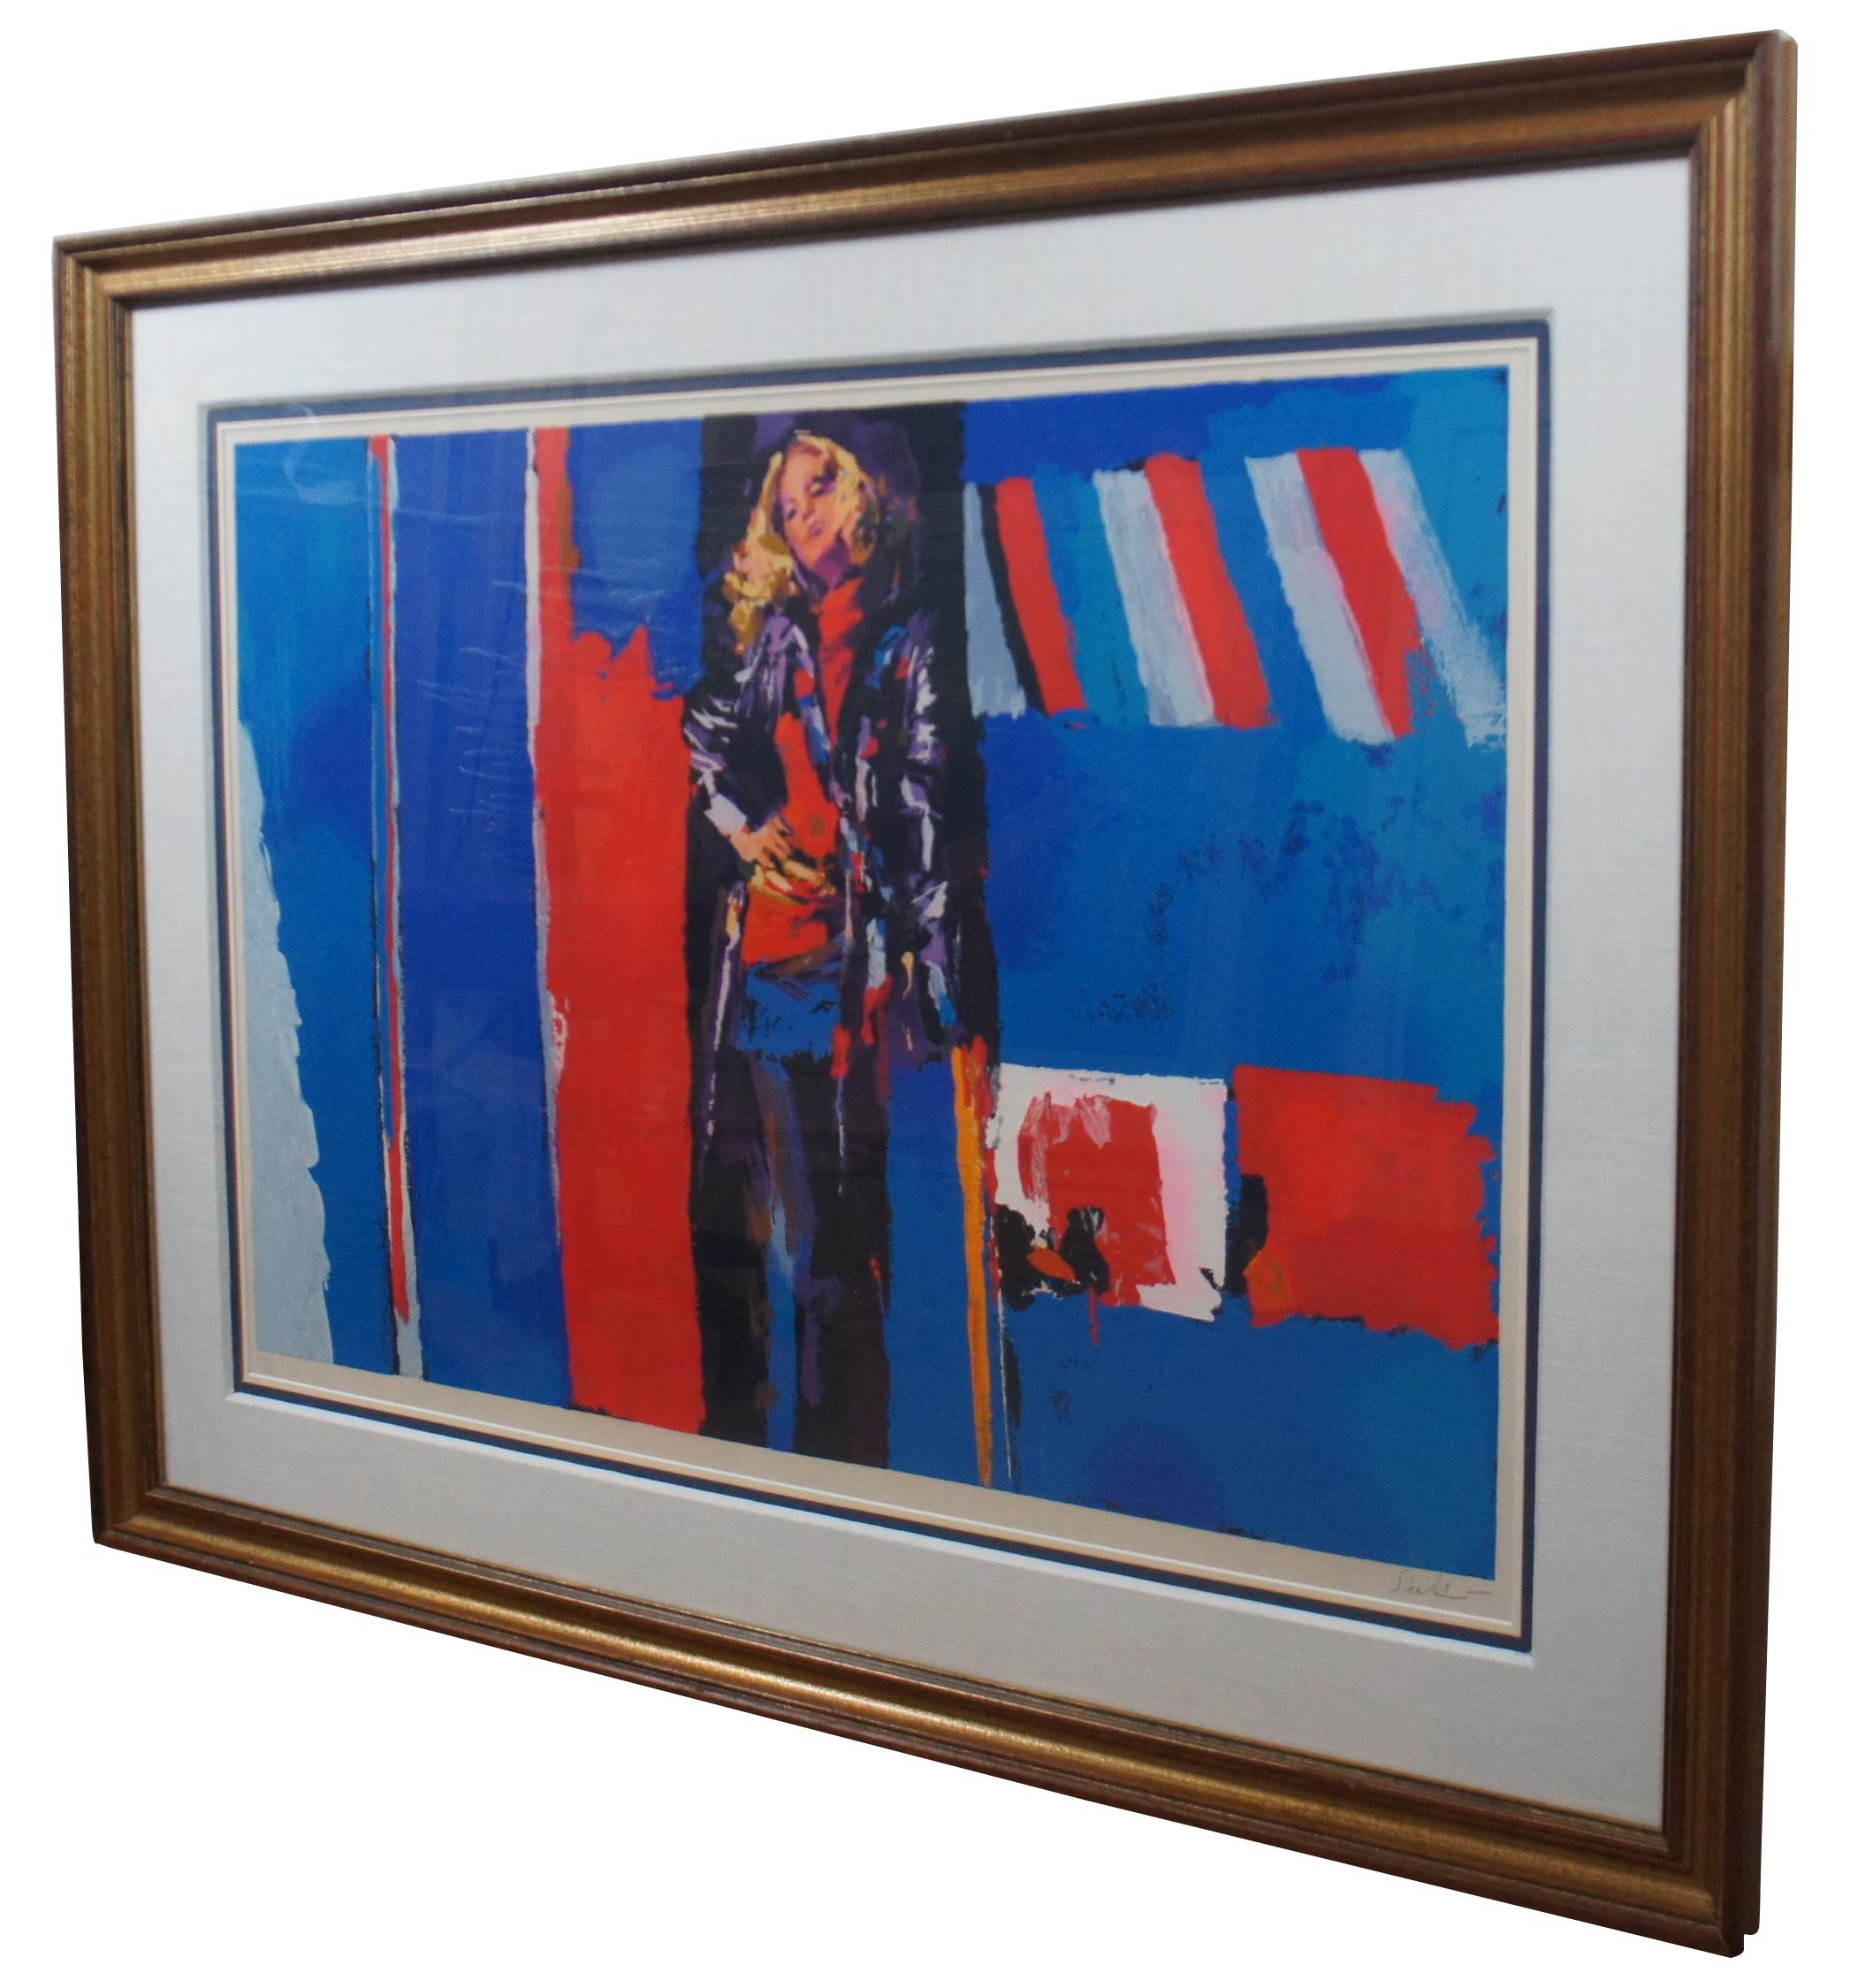 Vintage 1976 limited edition serigraph print by Nicola Simbari titled “Nanette,” showing a blonde woman posed in front of a red, white and blue backdrop; pencil signed and numbered 243/300. “Nicola Simbari is a painter of semi-abstract impressionist